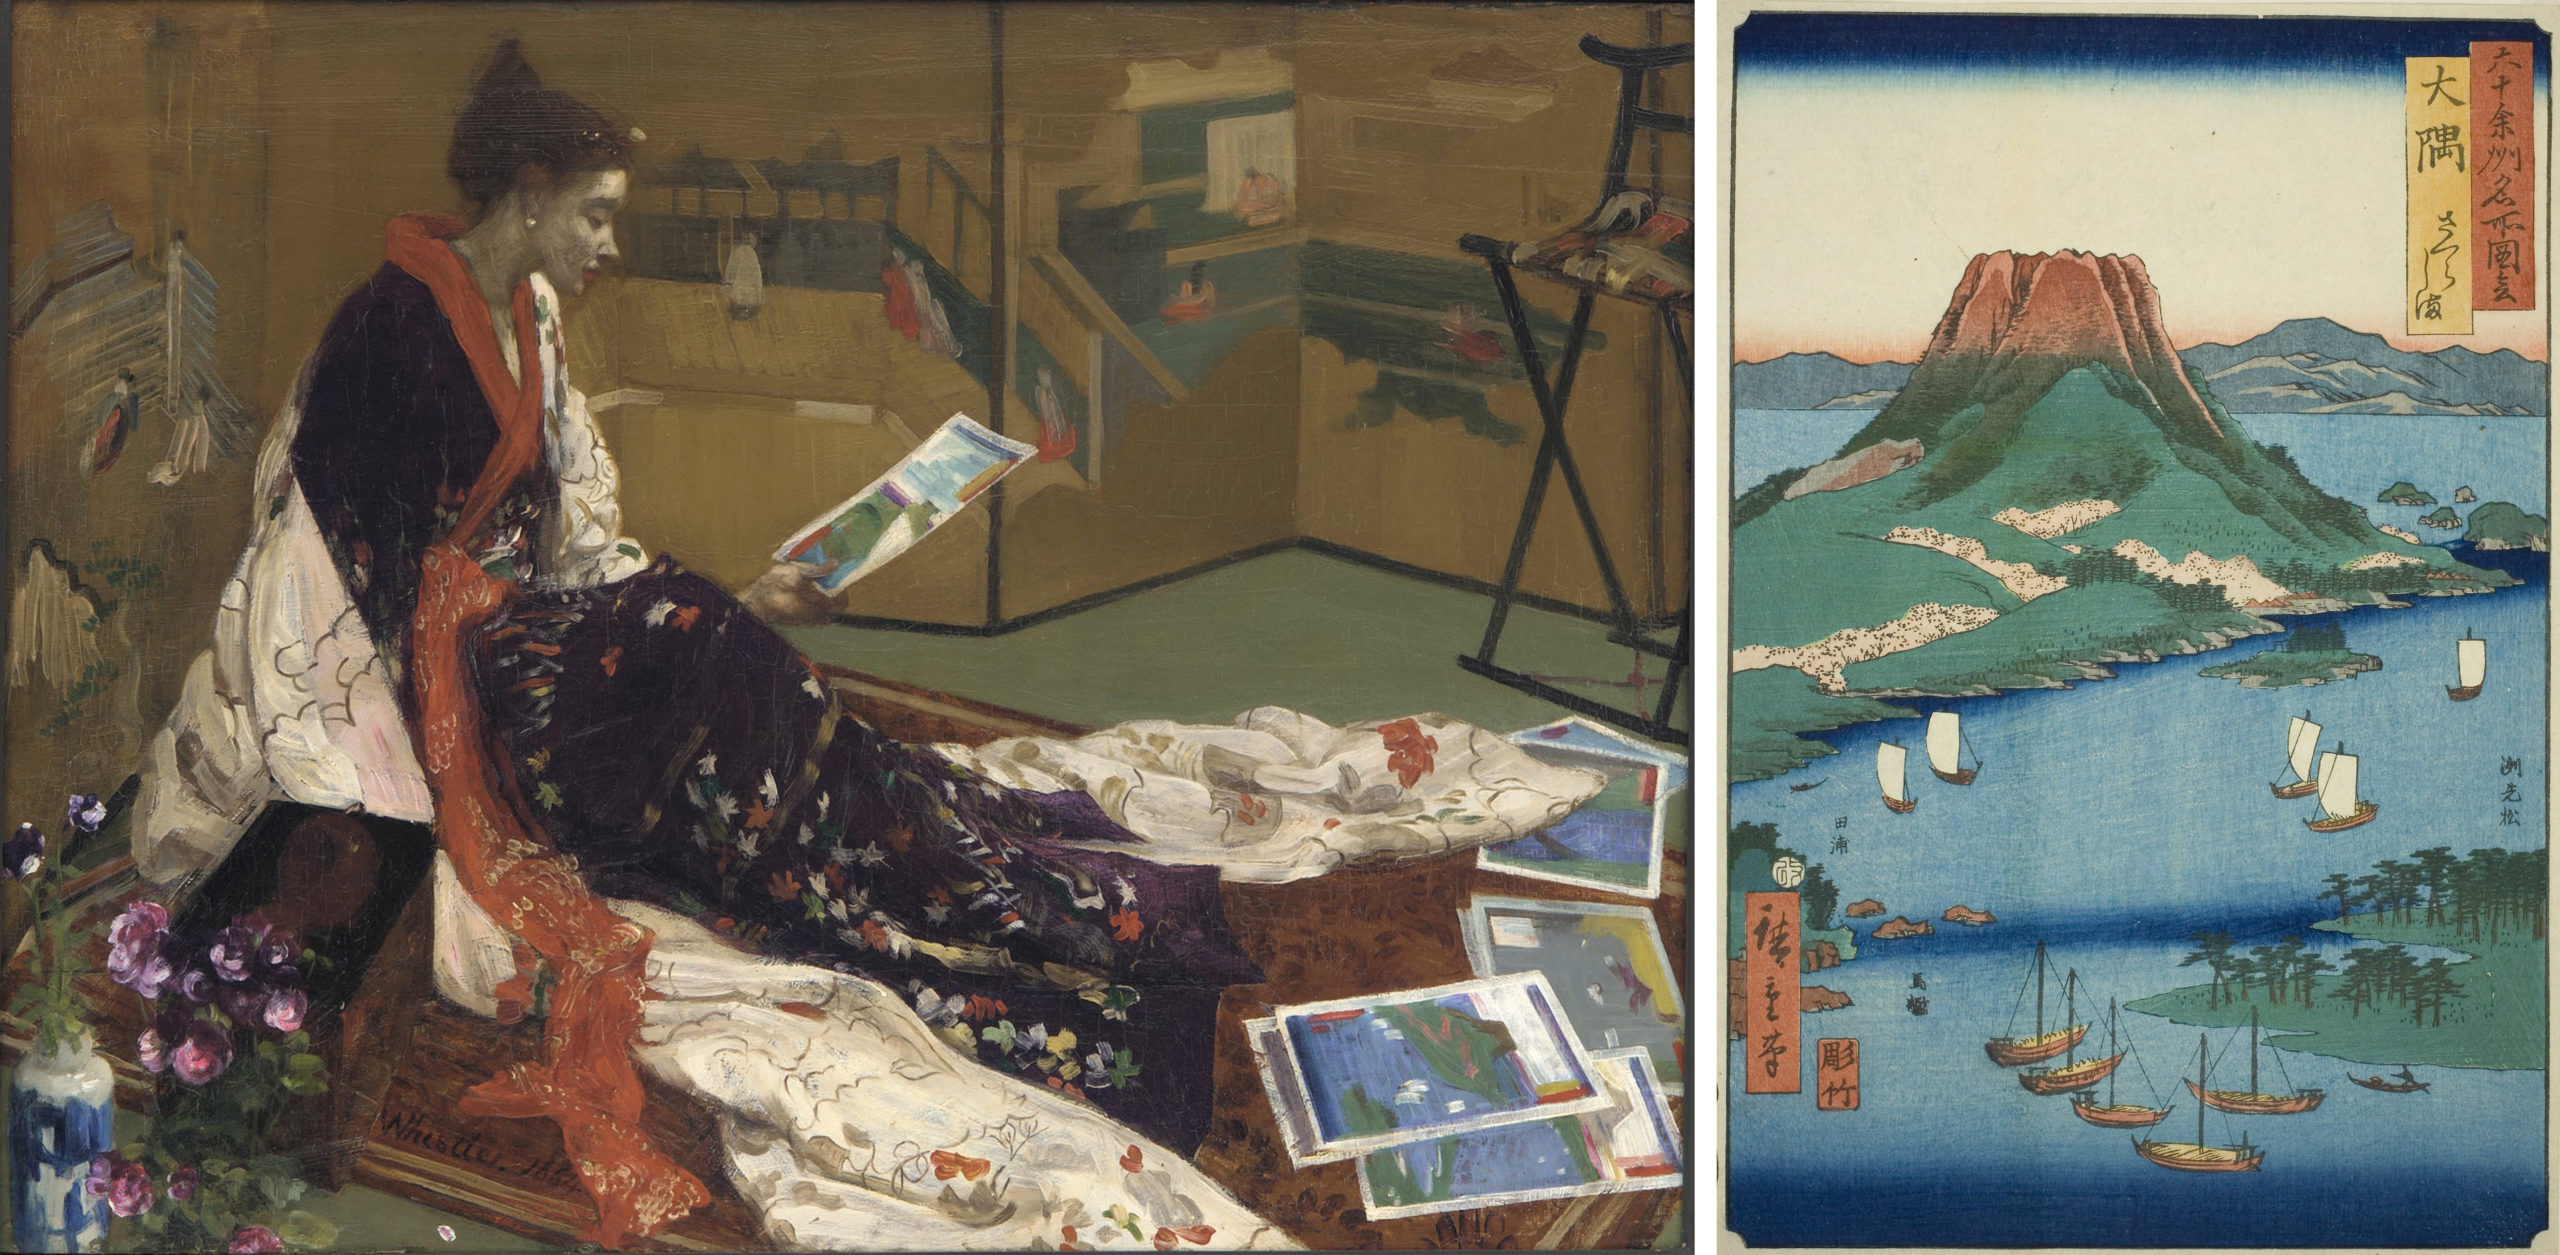 Left: James McNeil Whistler, Caprice in Purple and Gold: The Golden Screen, 1864, oil on wood, 50.1 x 68.5 cm (National Museum of Asian Art, Washington, DC); Right: Utagawa Hiroshige, Osumi Sakurajima, from Famous Views of Sixty-odd Provinces, 1856, woodblock print, 36.8 x 23.5 cm (The Art Institute of Chicago)